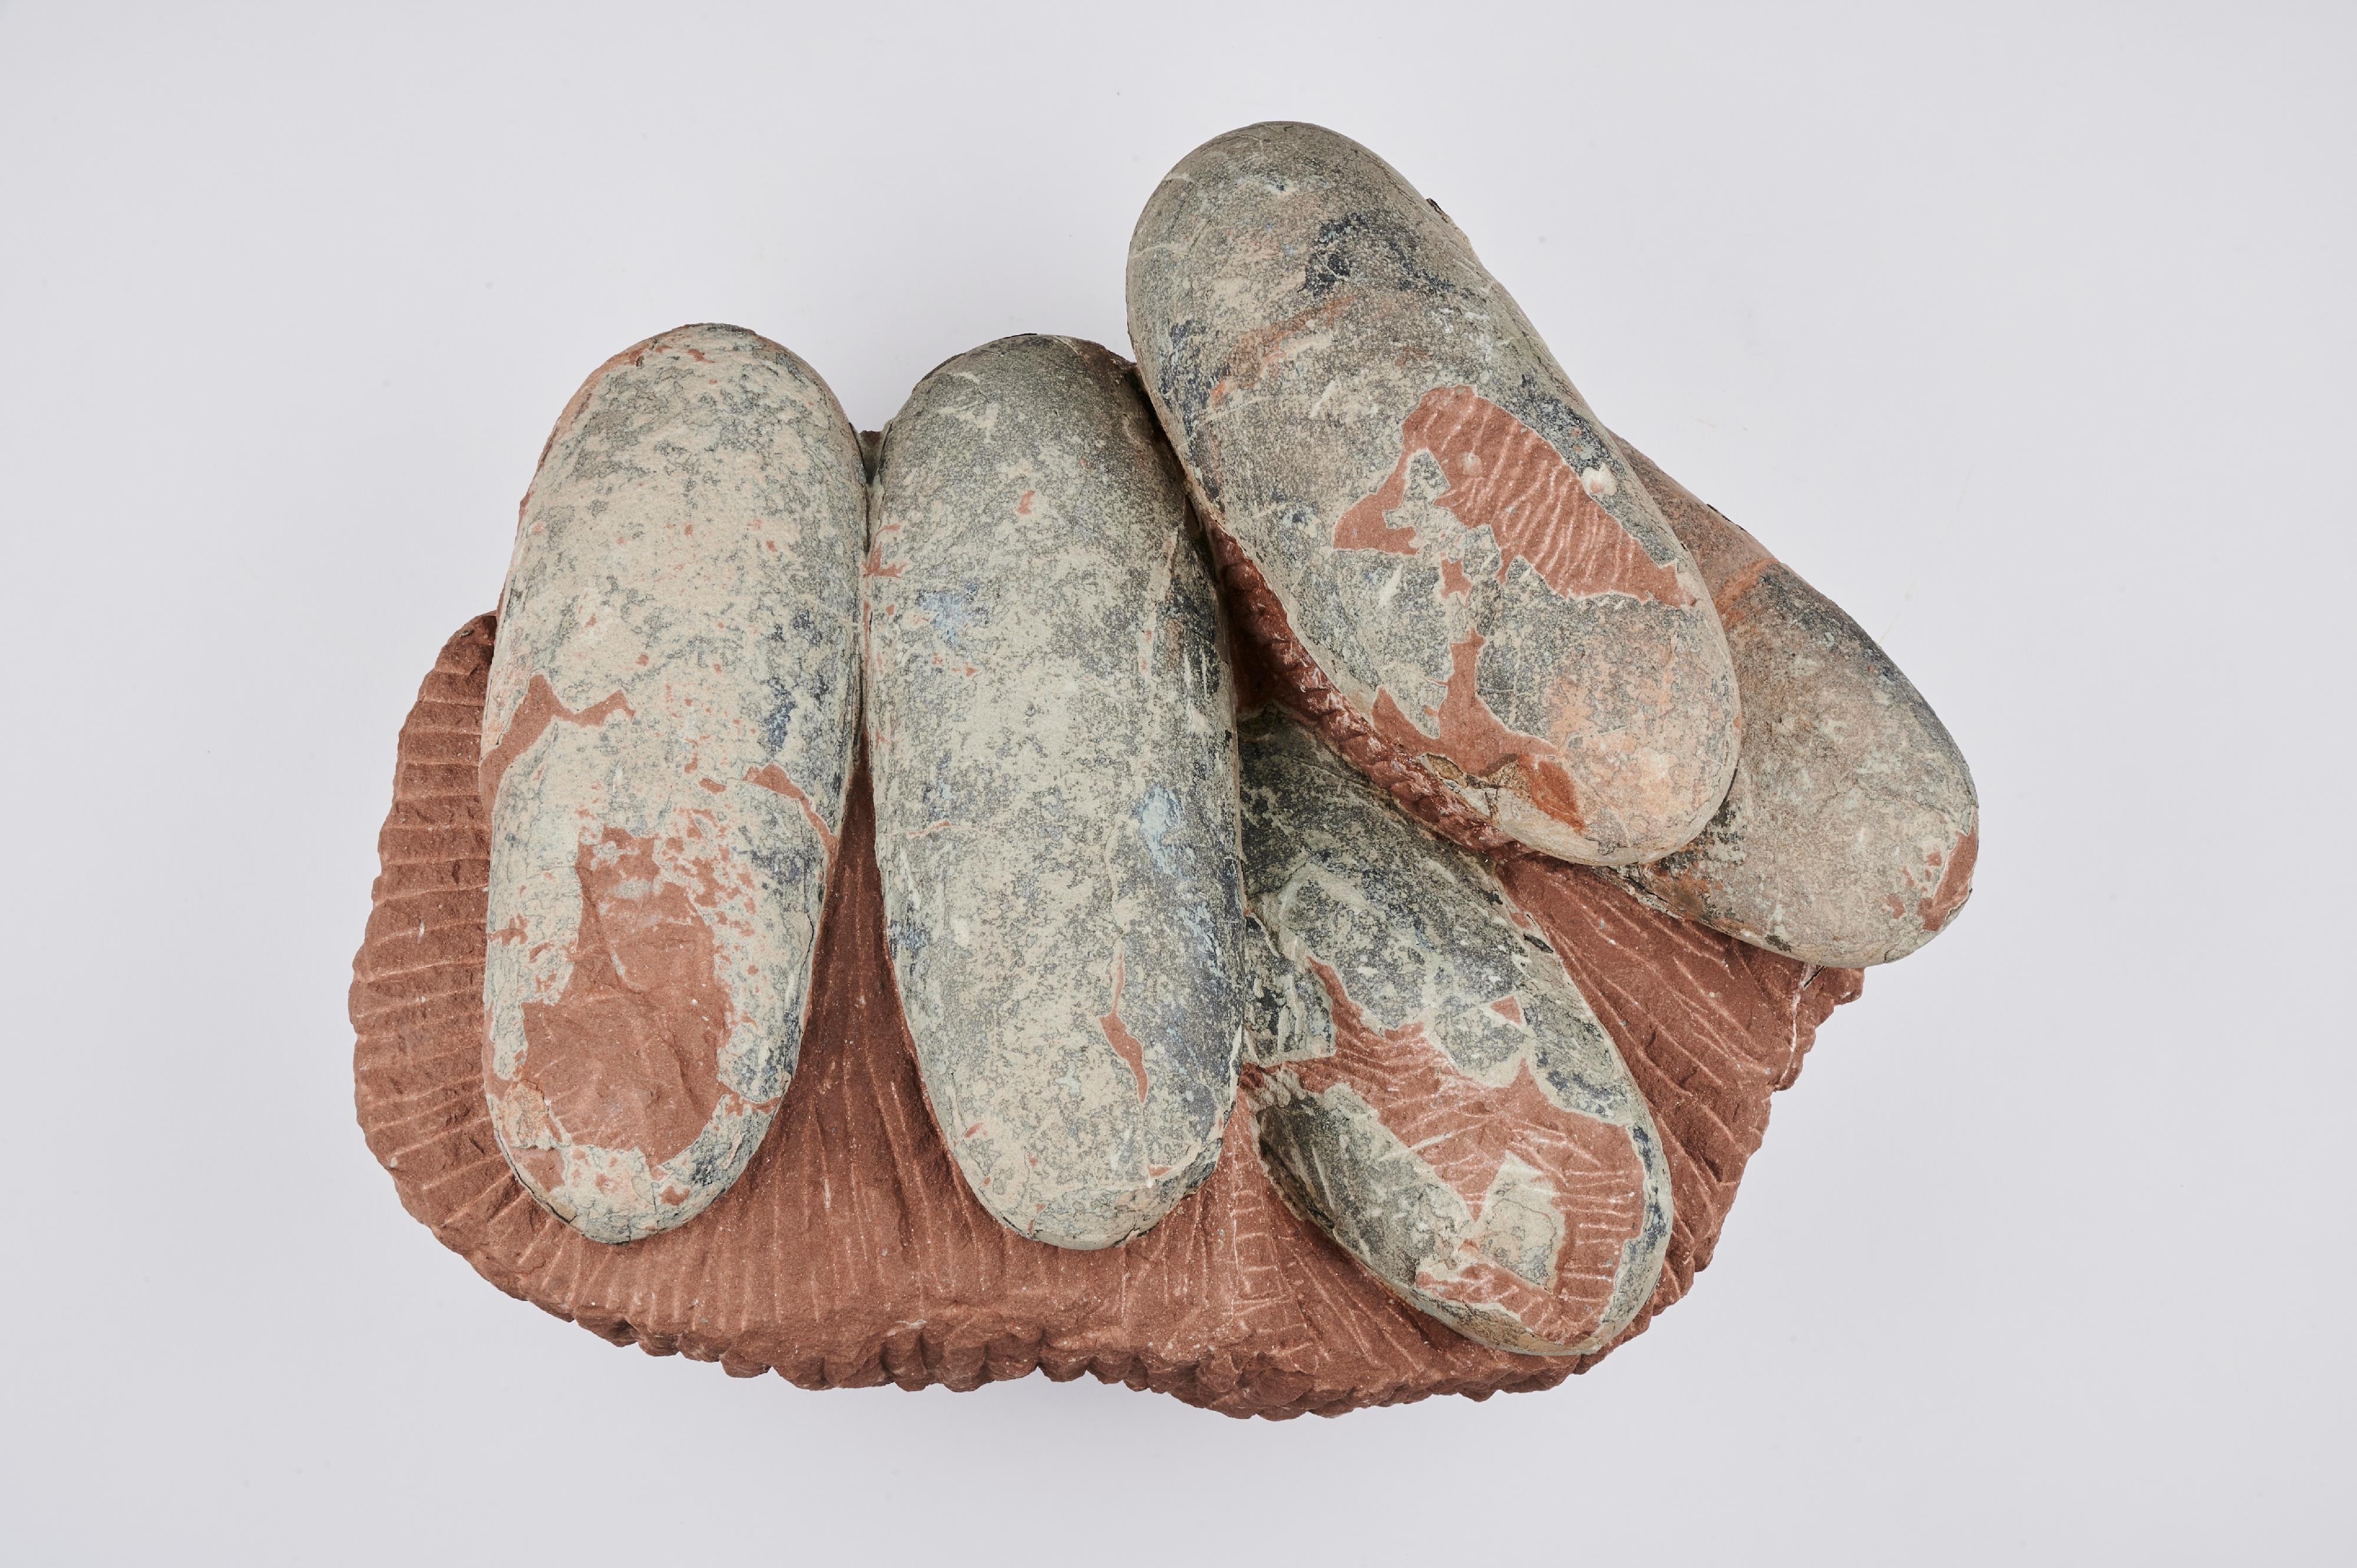 Part of the permanent exhibition "Extinction·Resilience" at the Palaeontology Gallery at the Hong Kong Science Museum will be temporarily closed from April 6 (Saturday) to the end of April for renewal of exhibits. Photo shows elongated dinosaur eggs in the late Cretaceous 70 million years ago. They will be displayed after the renewal of exhibits. 